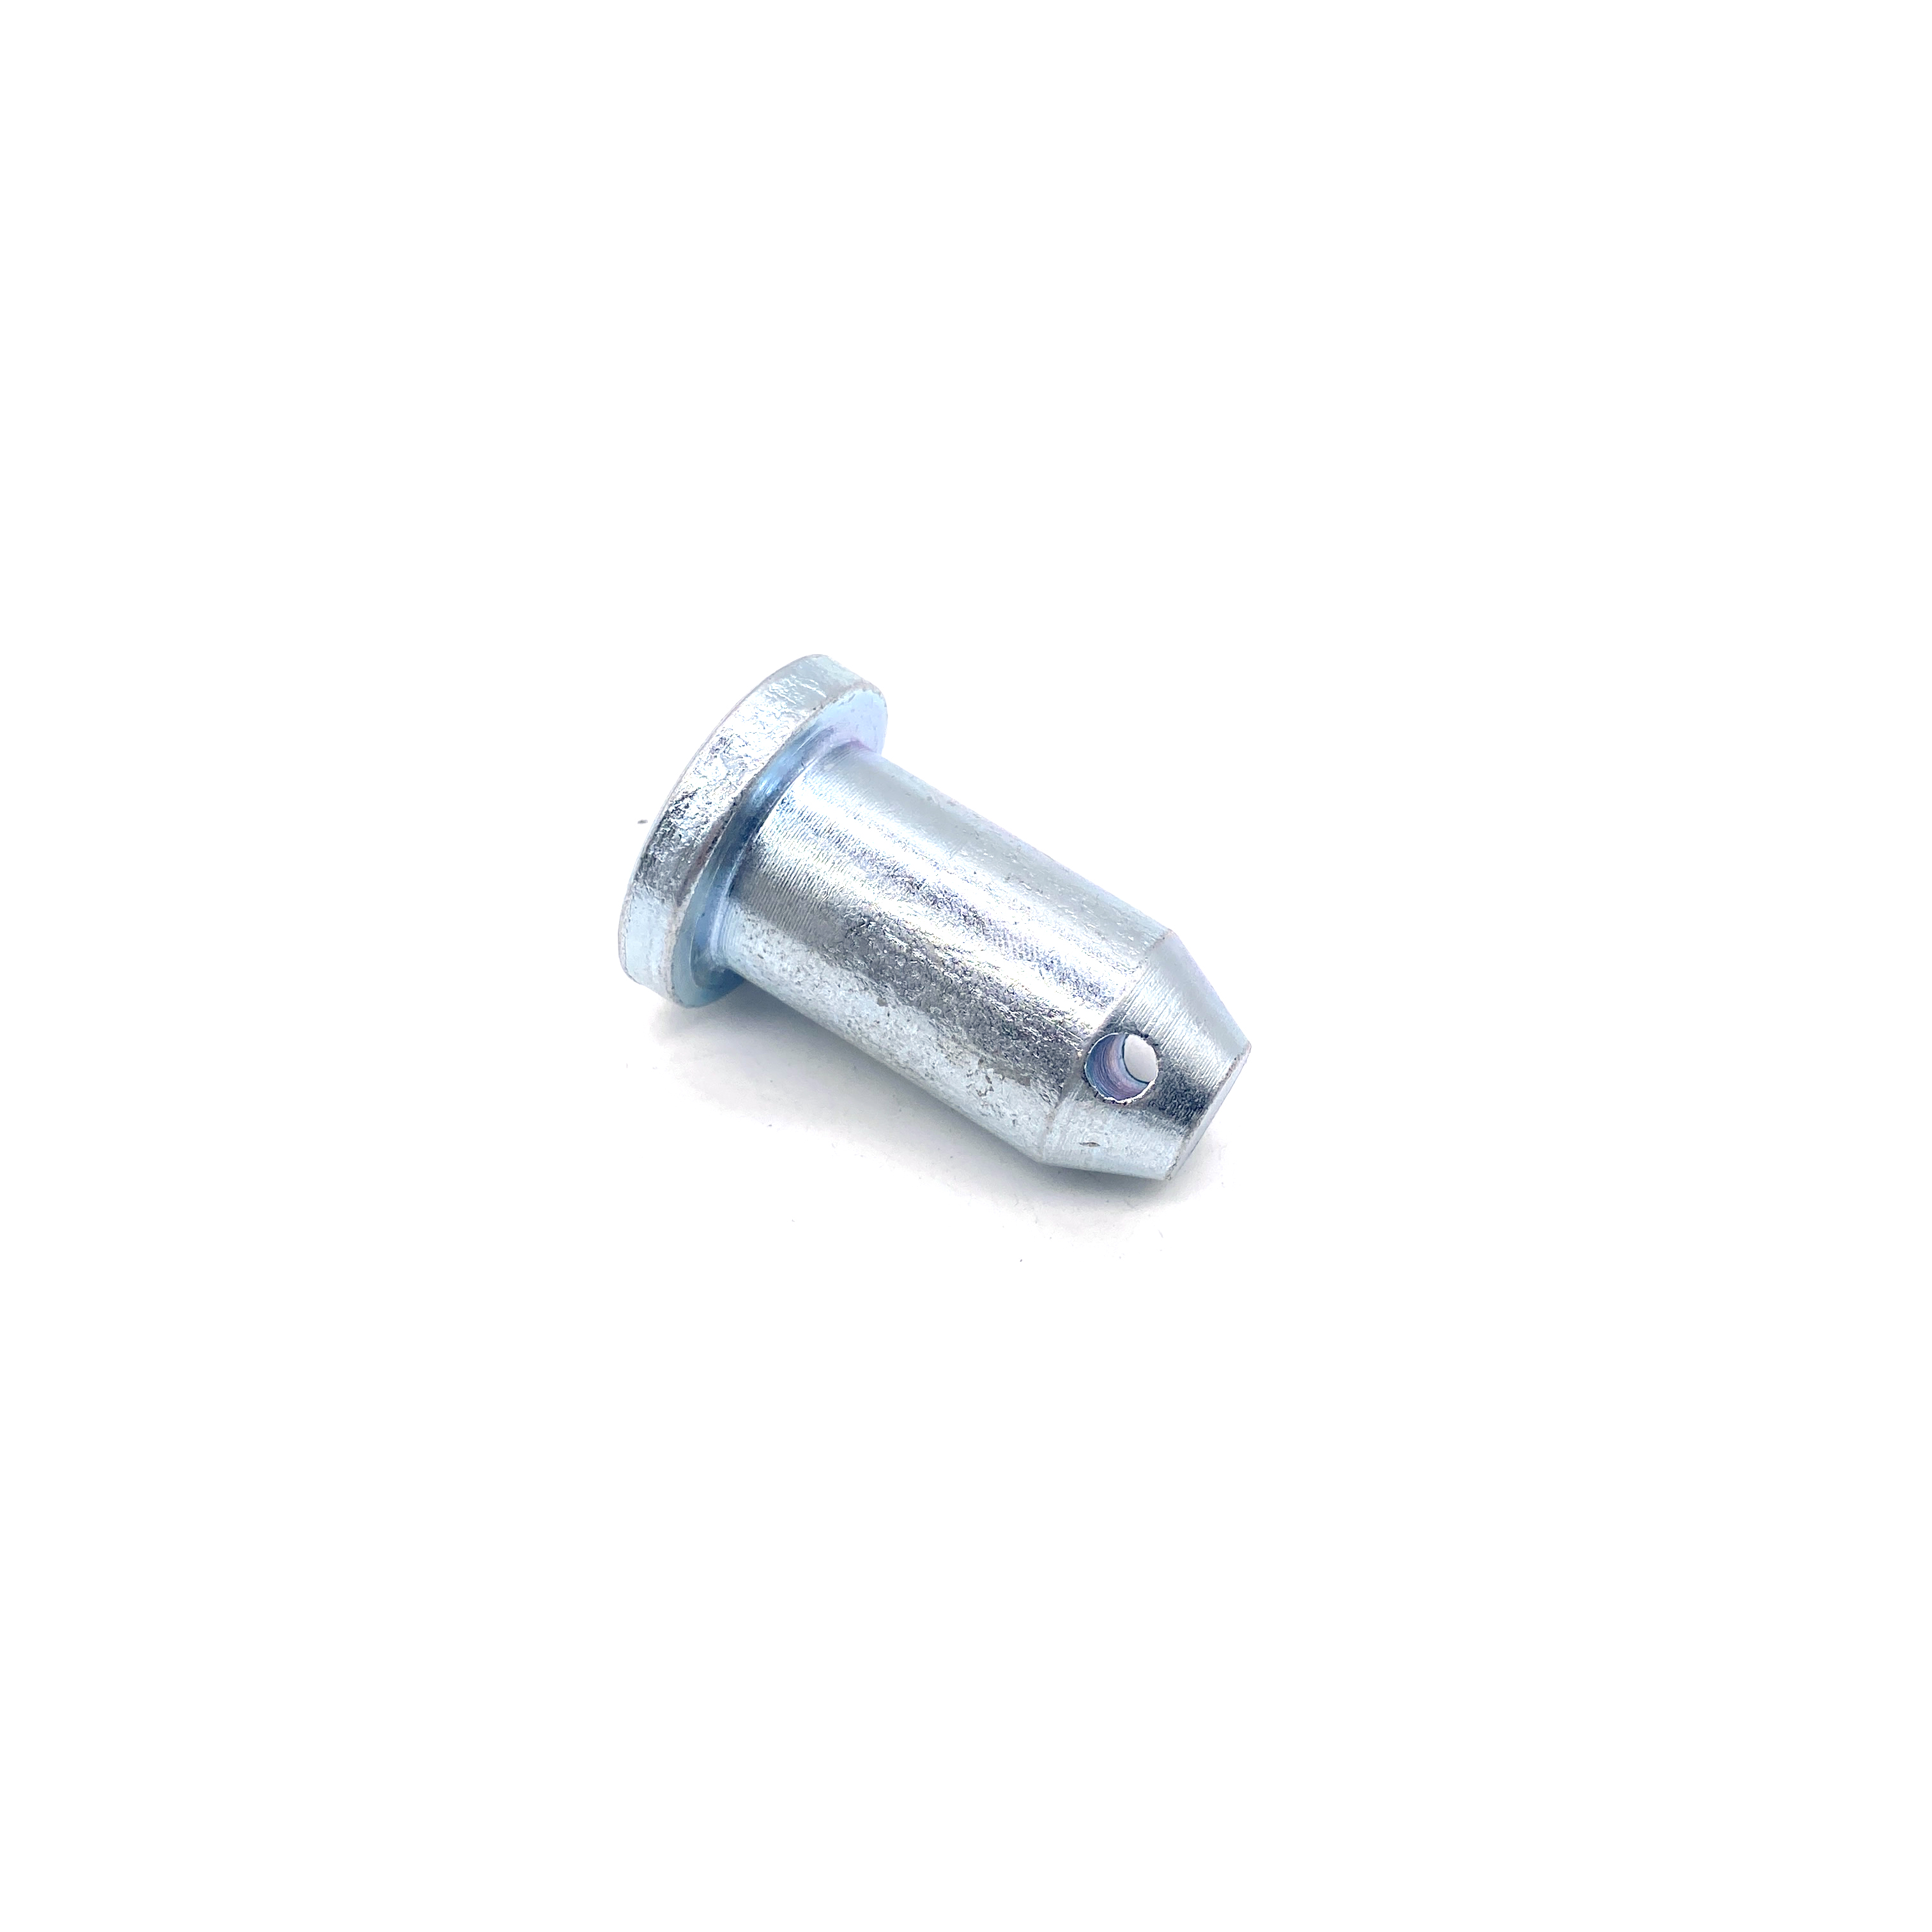 Carbon Steel Zinc Galvanized HDG Clevis Pin with Hole